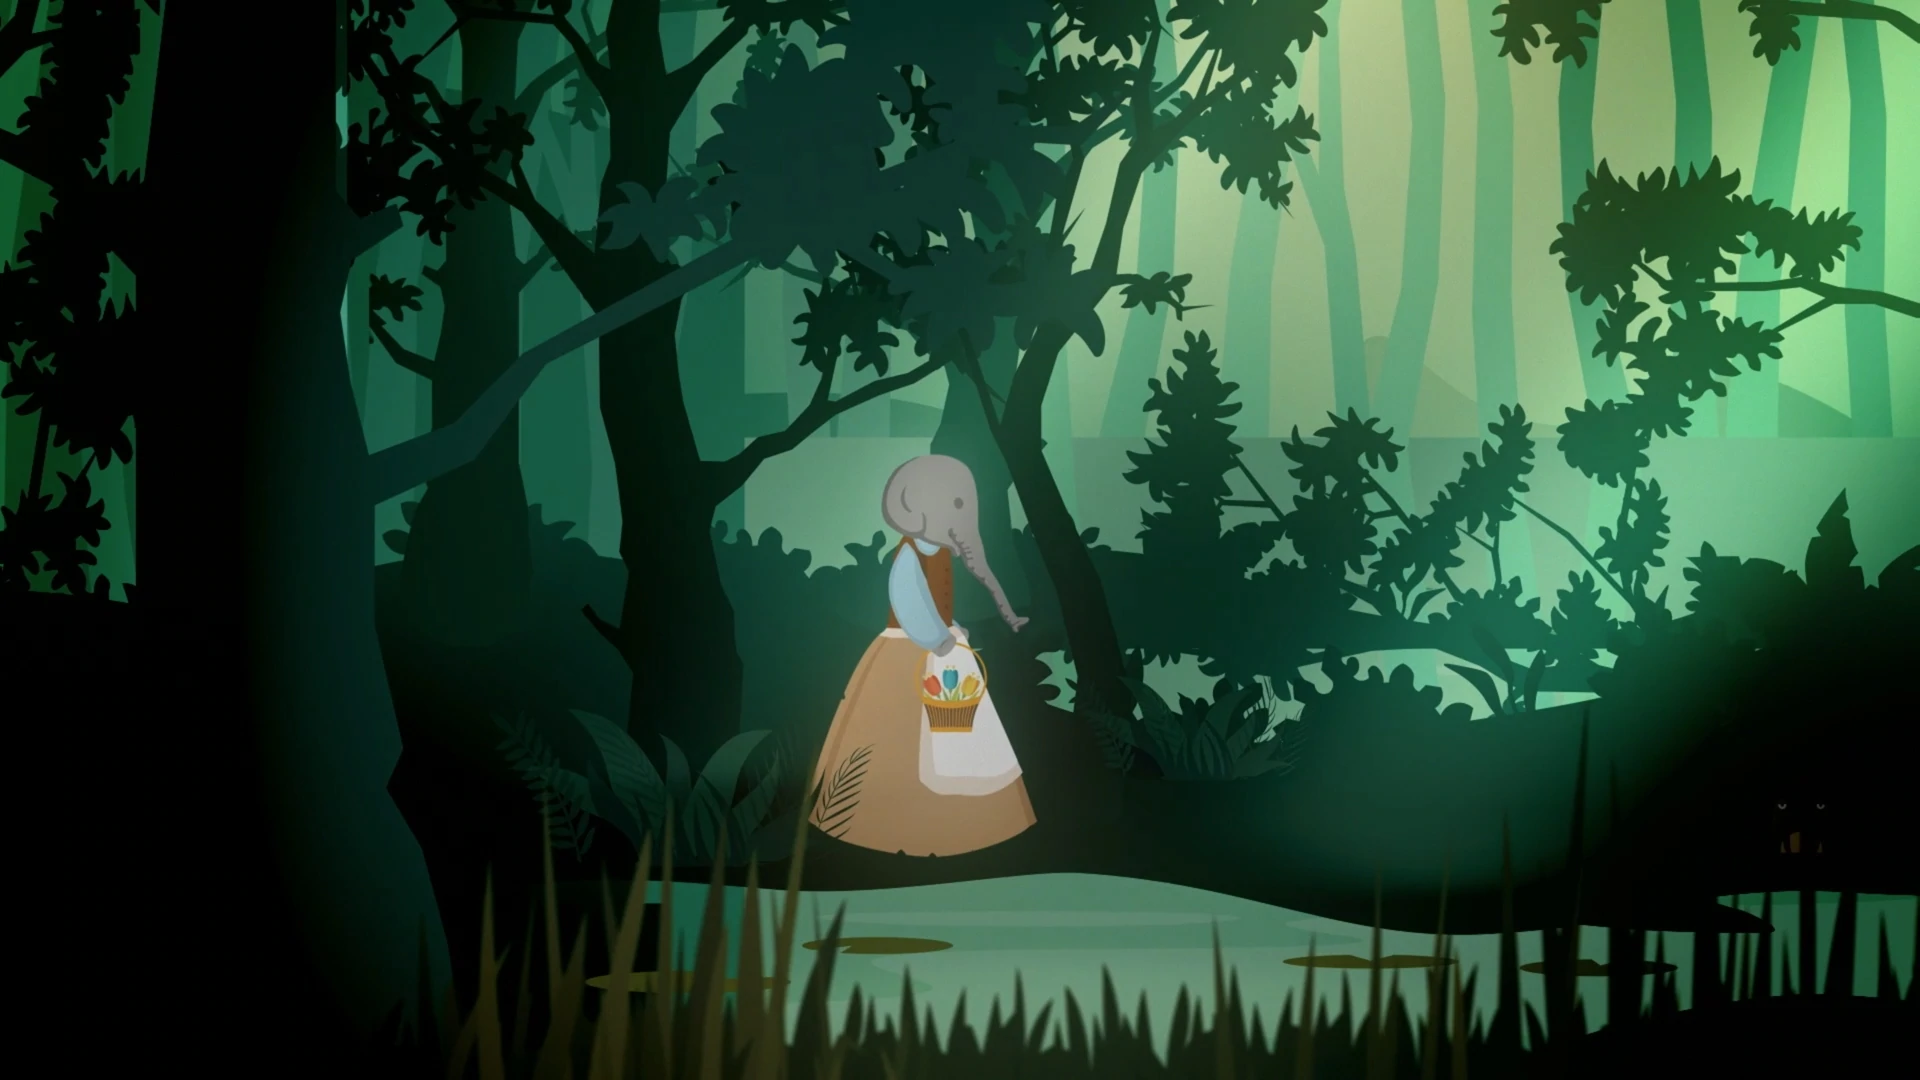 Ellie dressed as a princess looking for her frog to kiss. Walking through the dark forest.